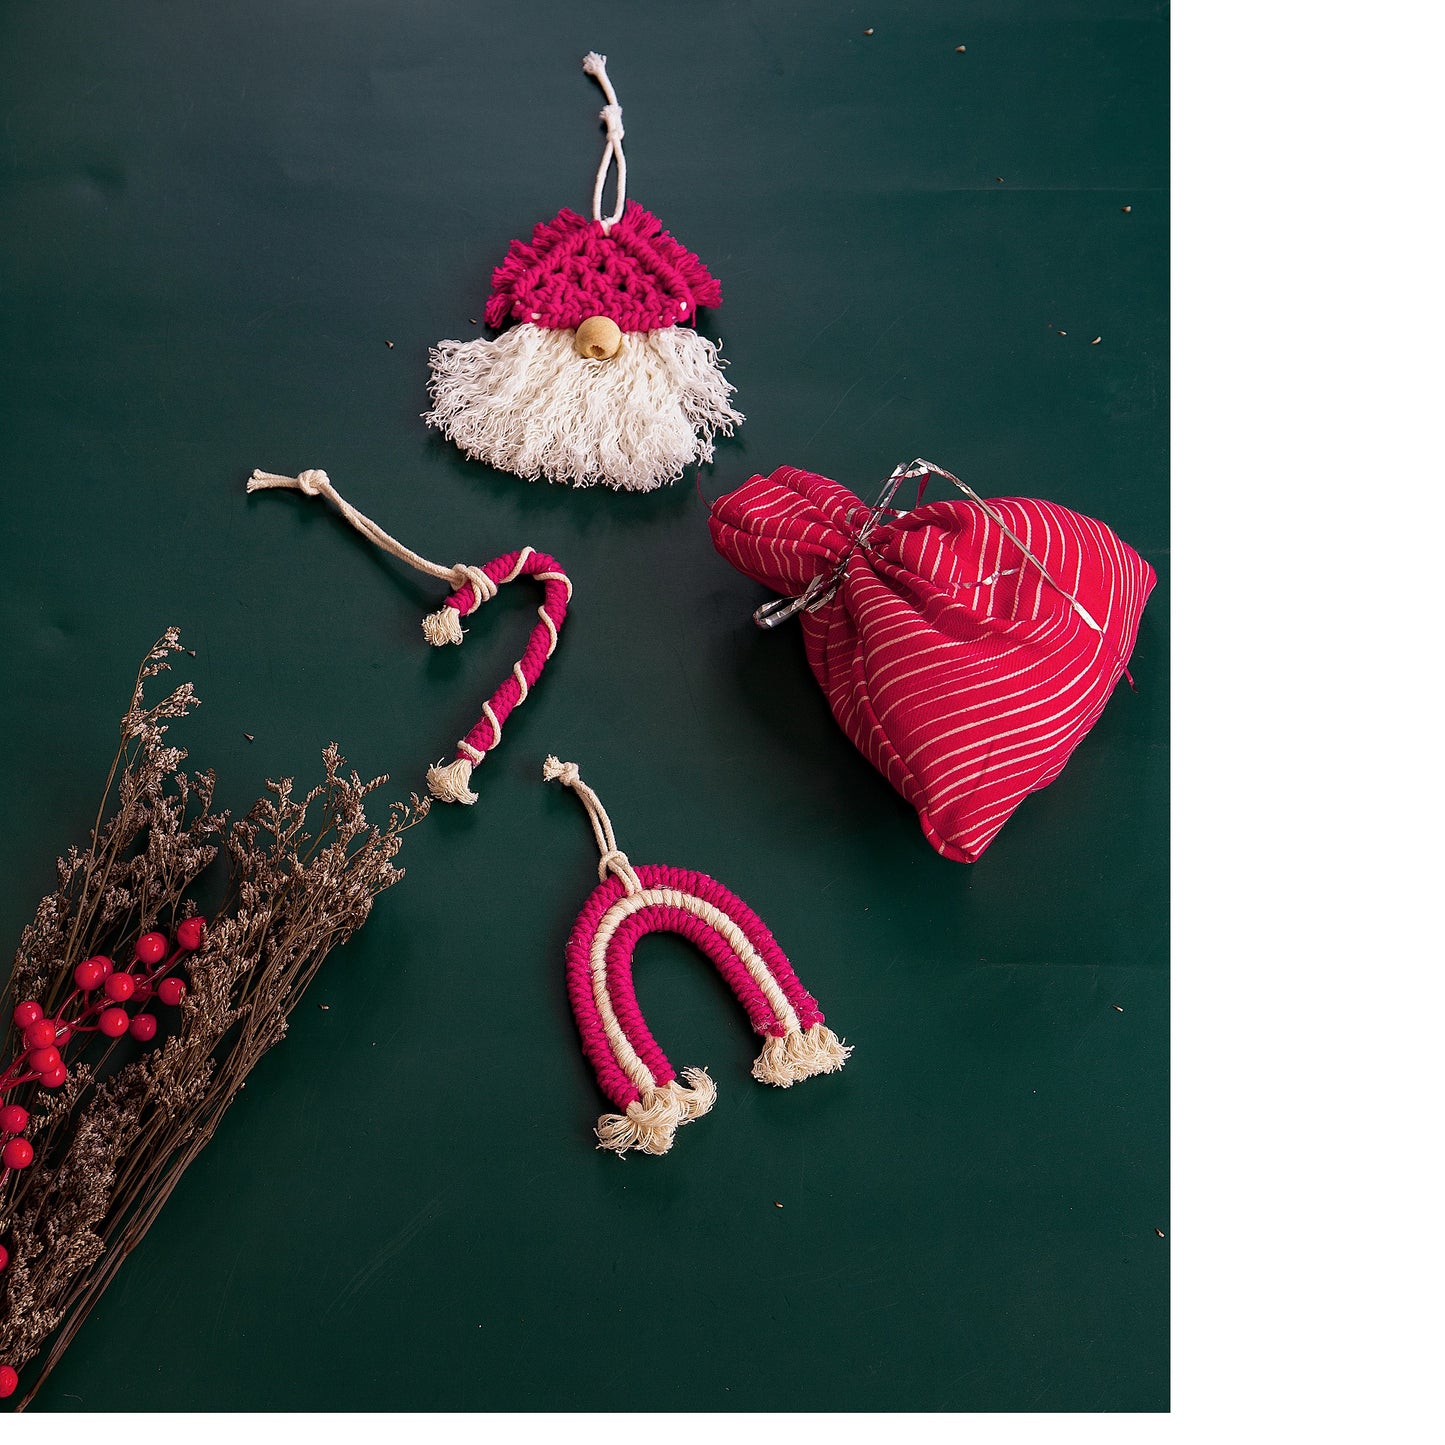 Christmas Tree Ornaments in Macrame - Set of 3 (in Red & White) with Gift Bag